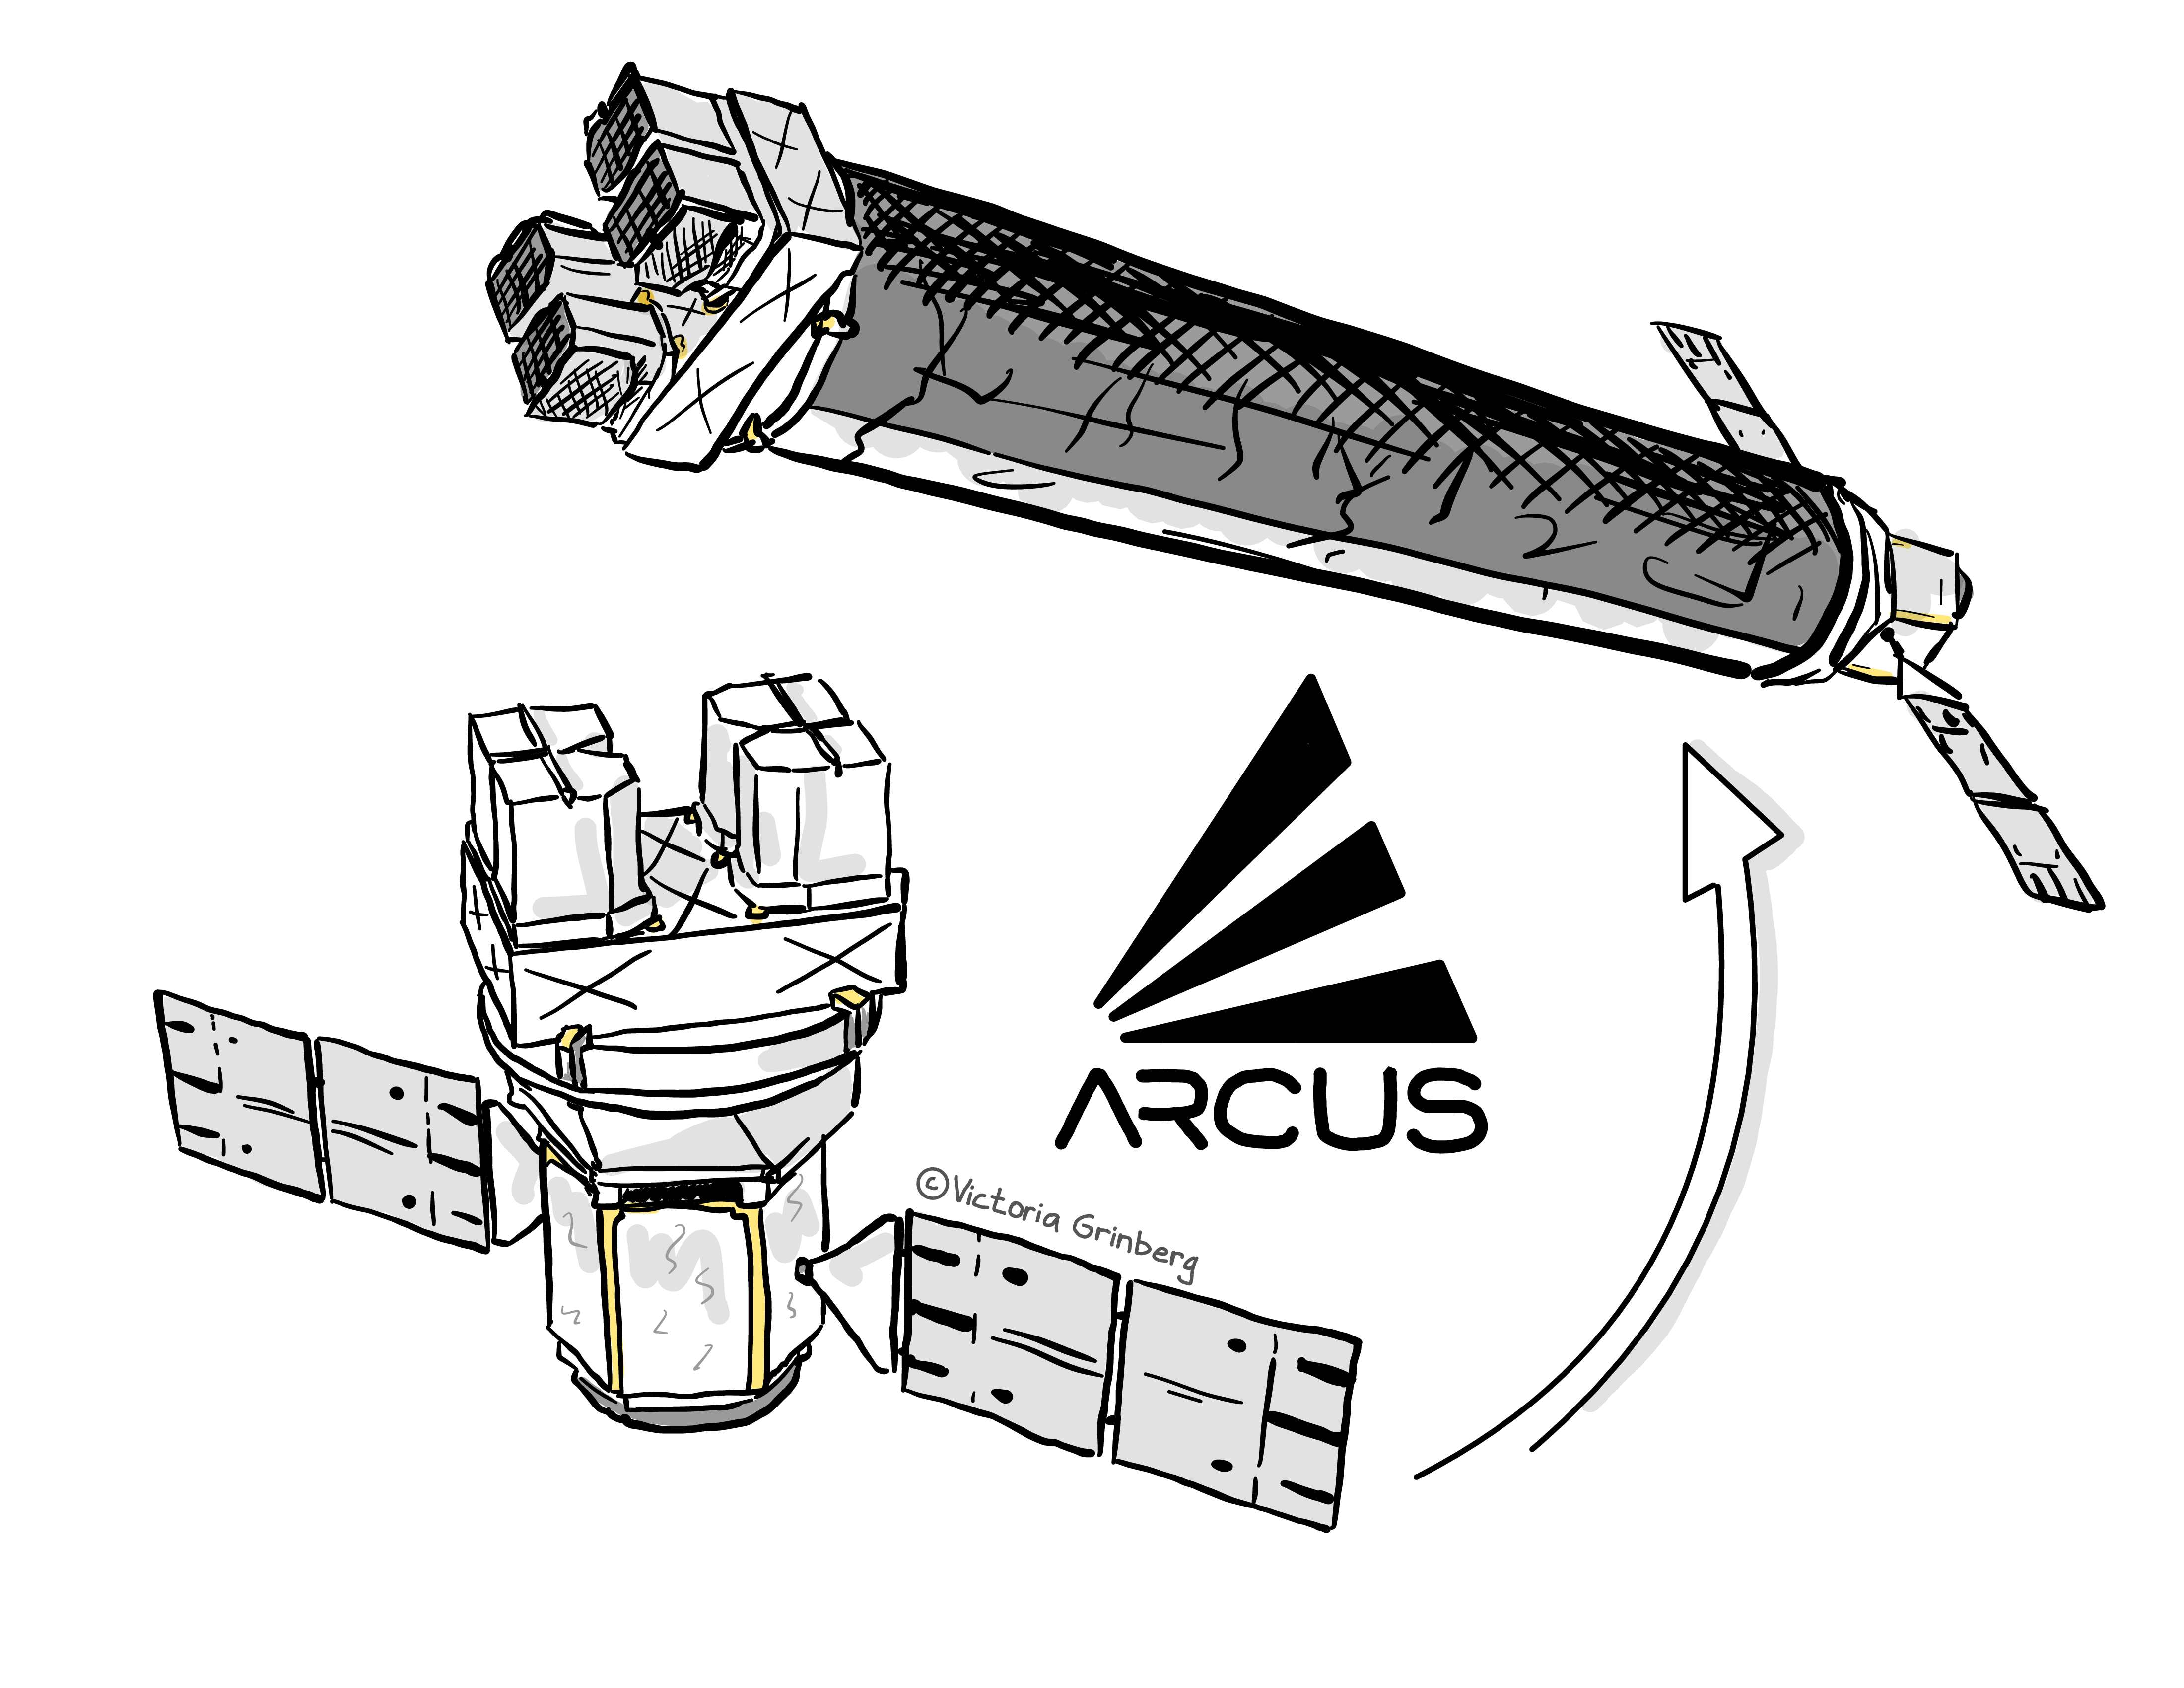 Black & white digital drawing of the the proposed Arcus X-ray observatory both in a launch configuration (stored, compact) and science configuration (boom extended, long telescope), with the Arcus prism-shaped logo.